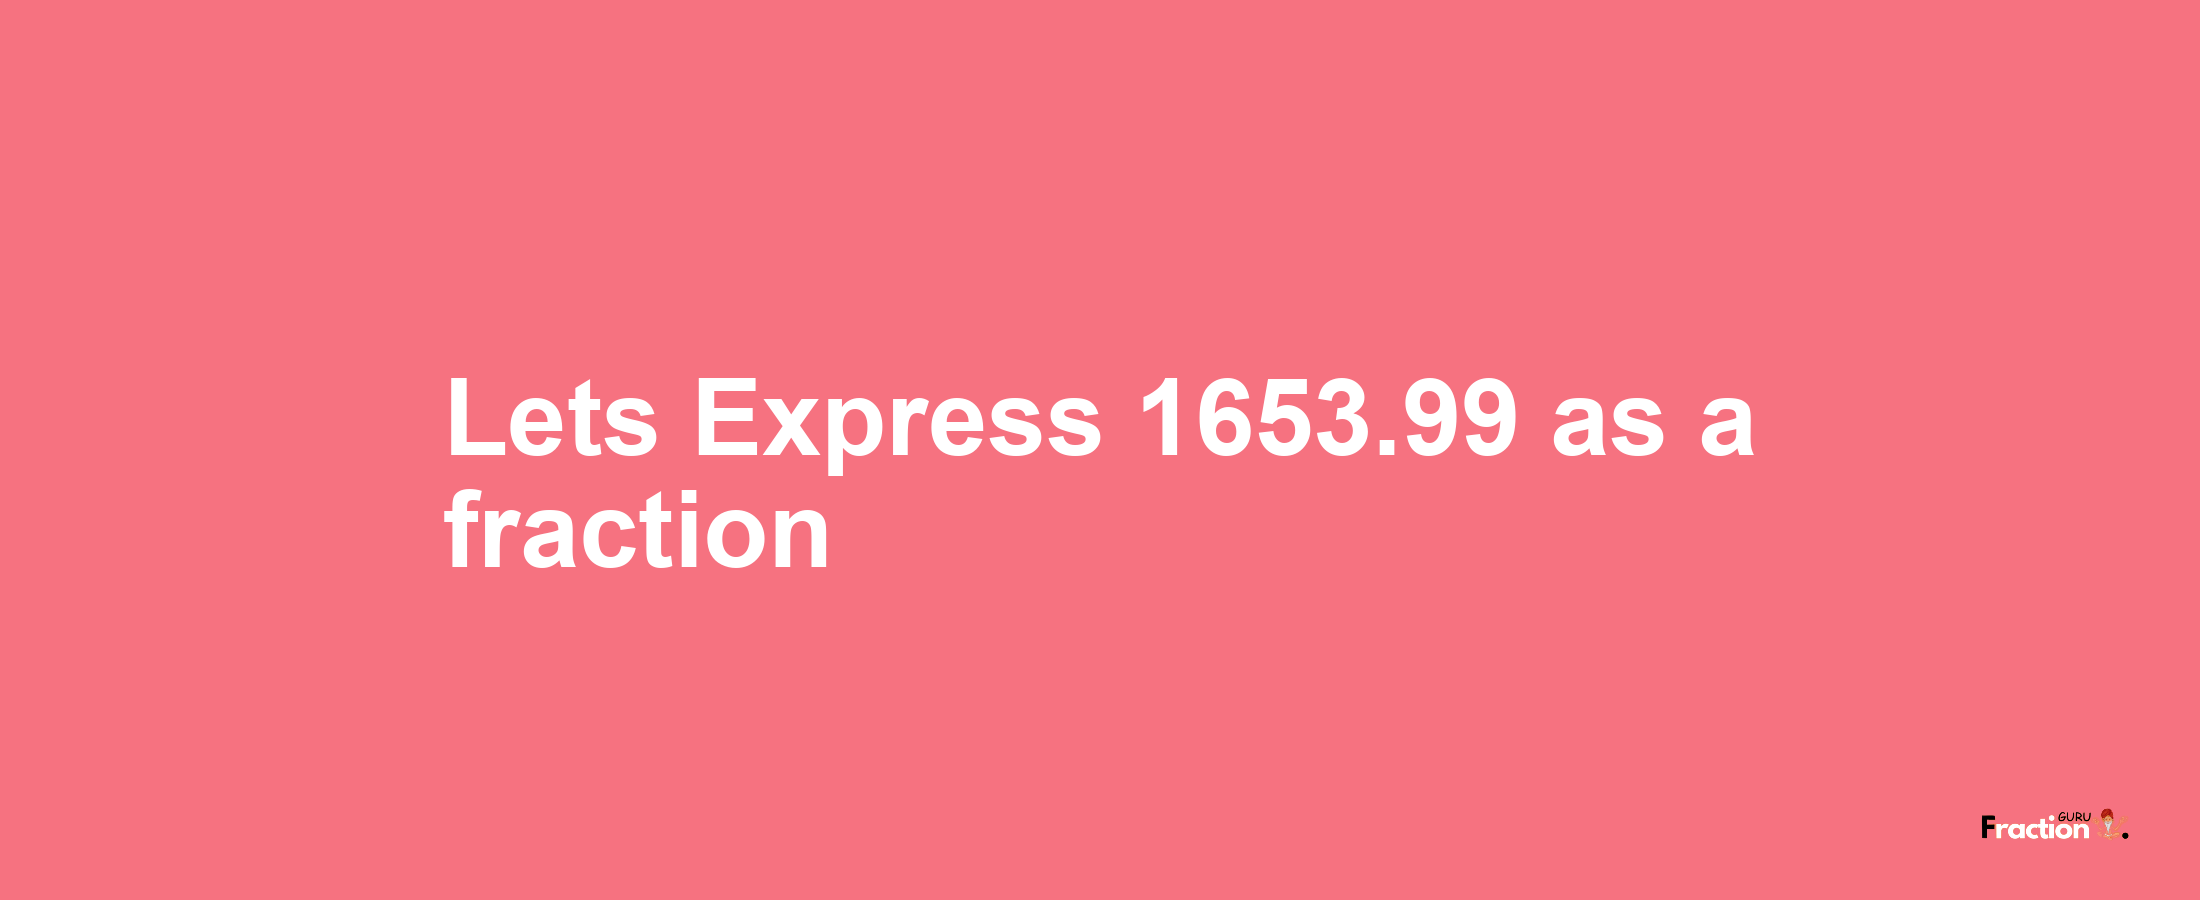 Lets Express 1653.99 as afraction